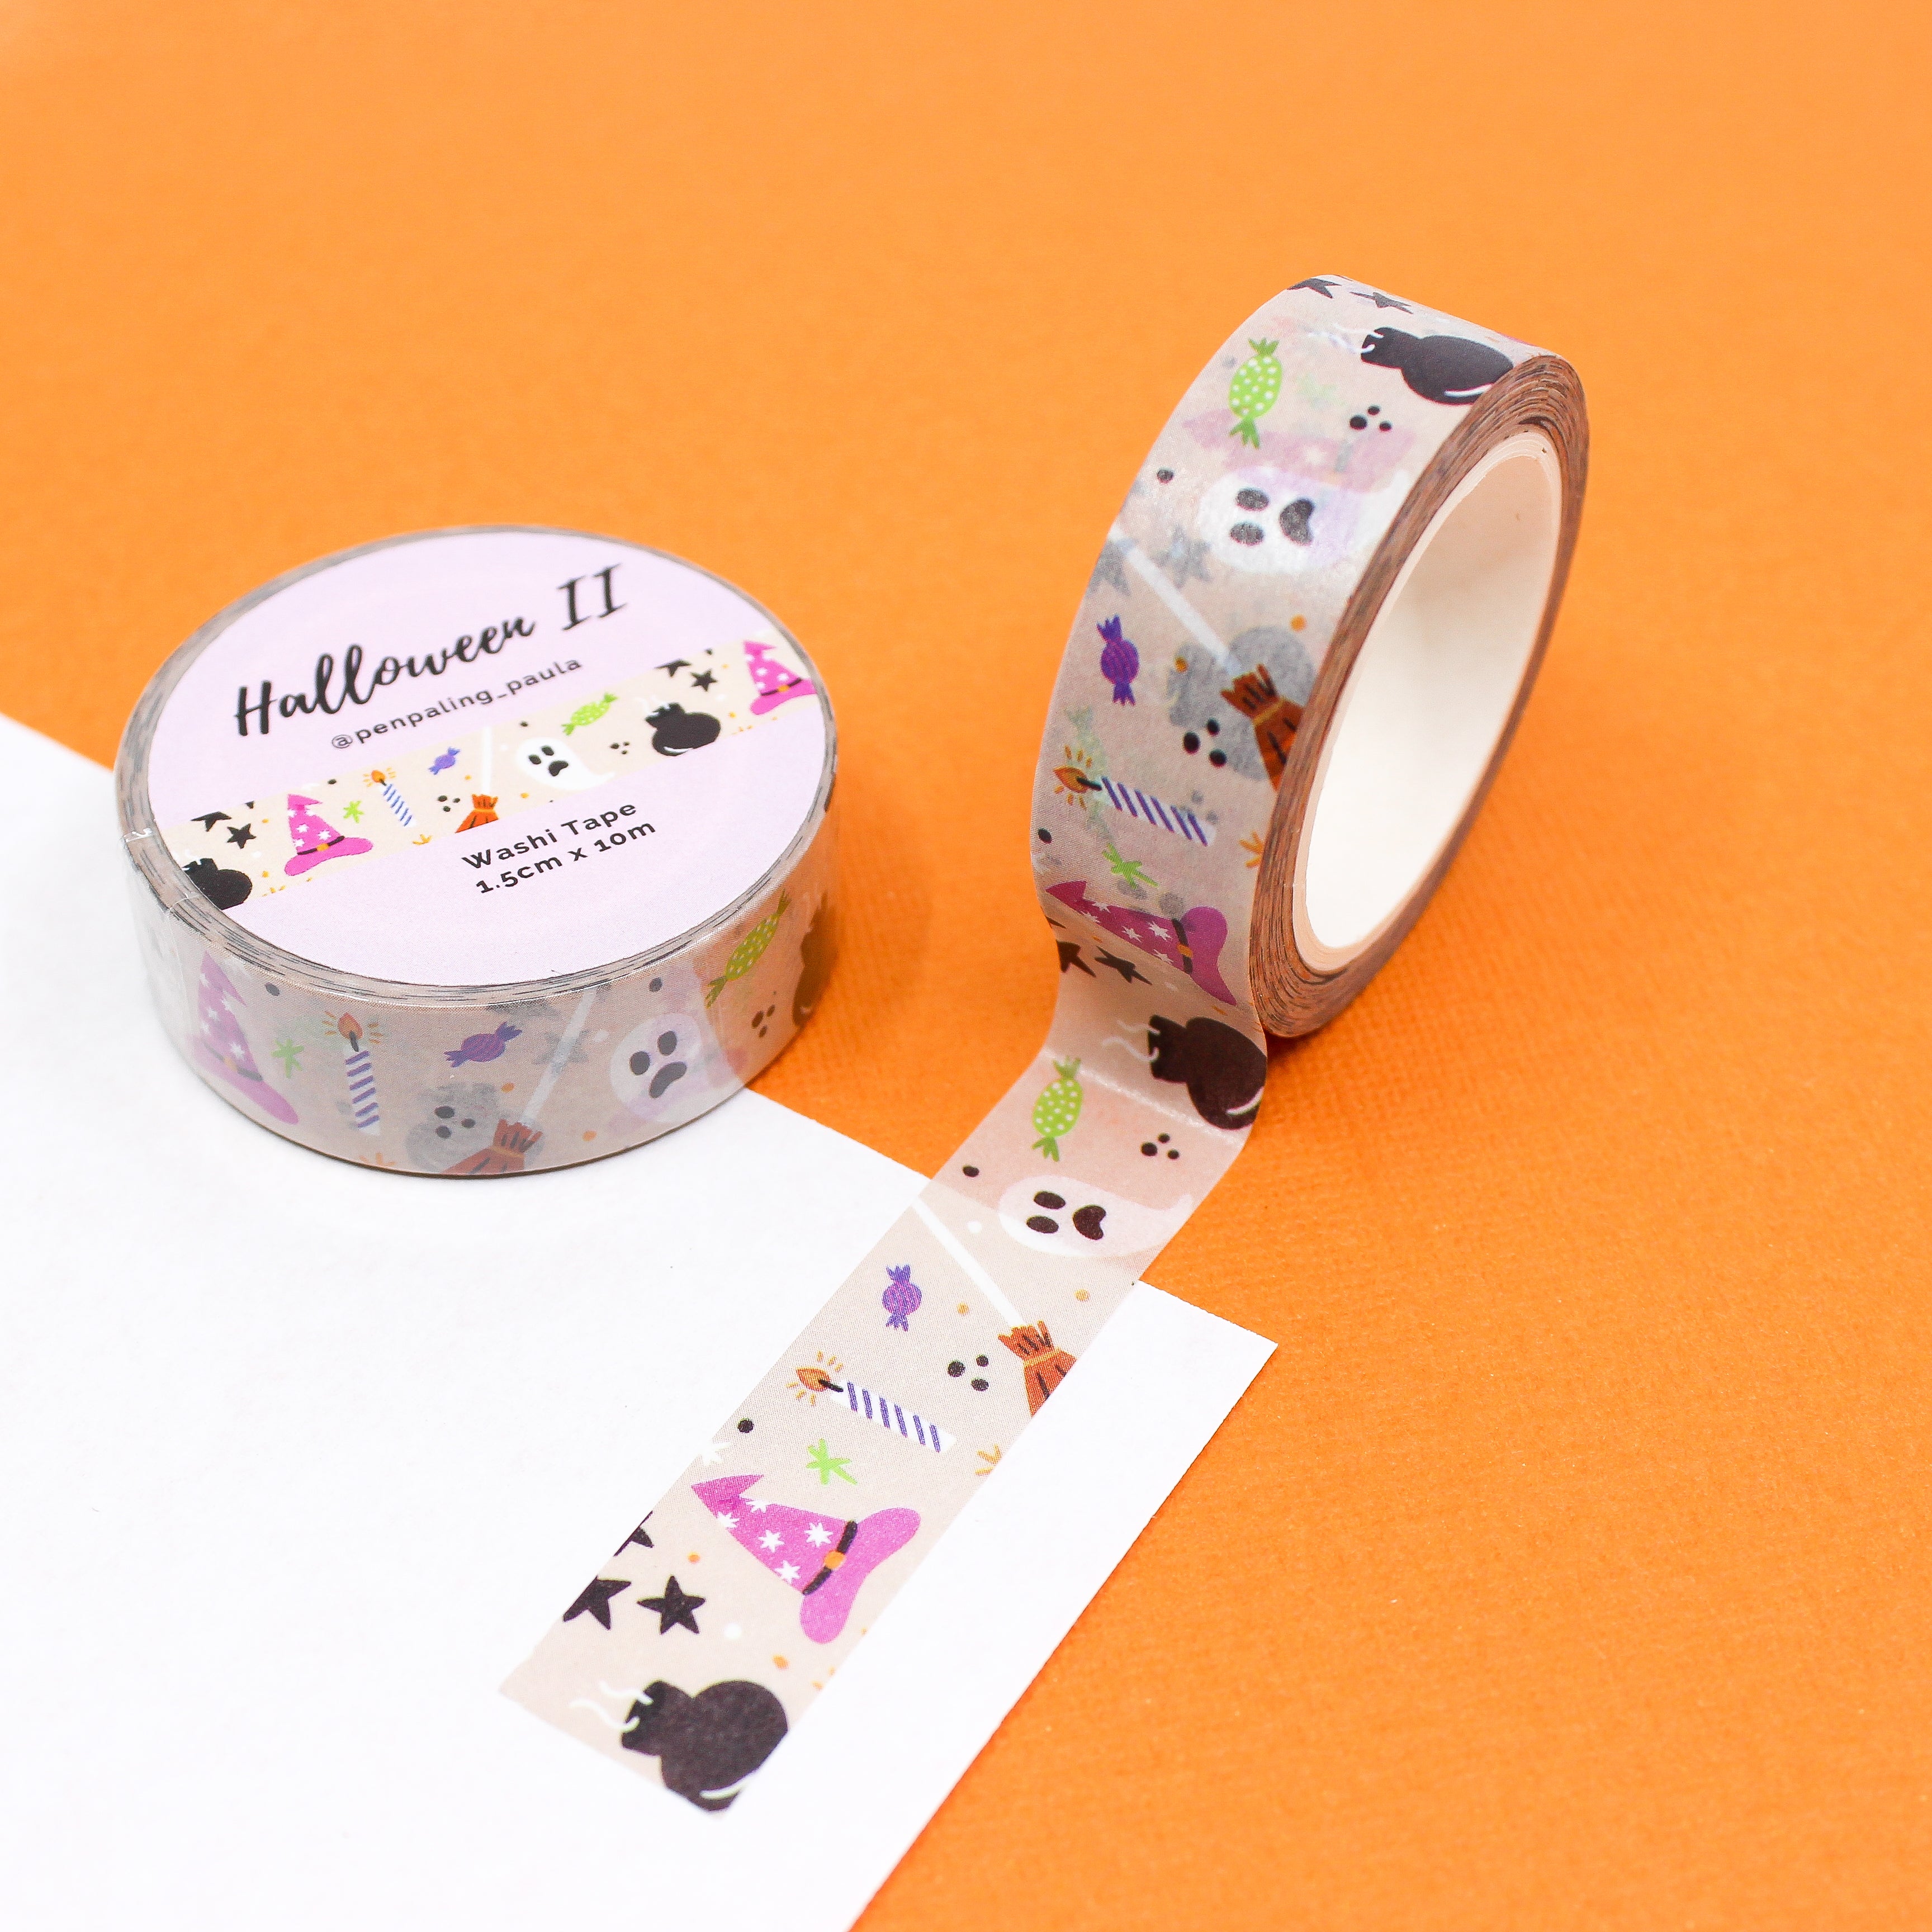 This is a purple witch hat, broom, cauldron and and white ghost themed washi tape from BBB Supplies Craft Shop